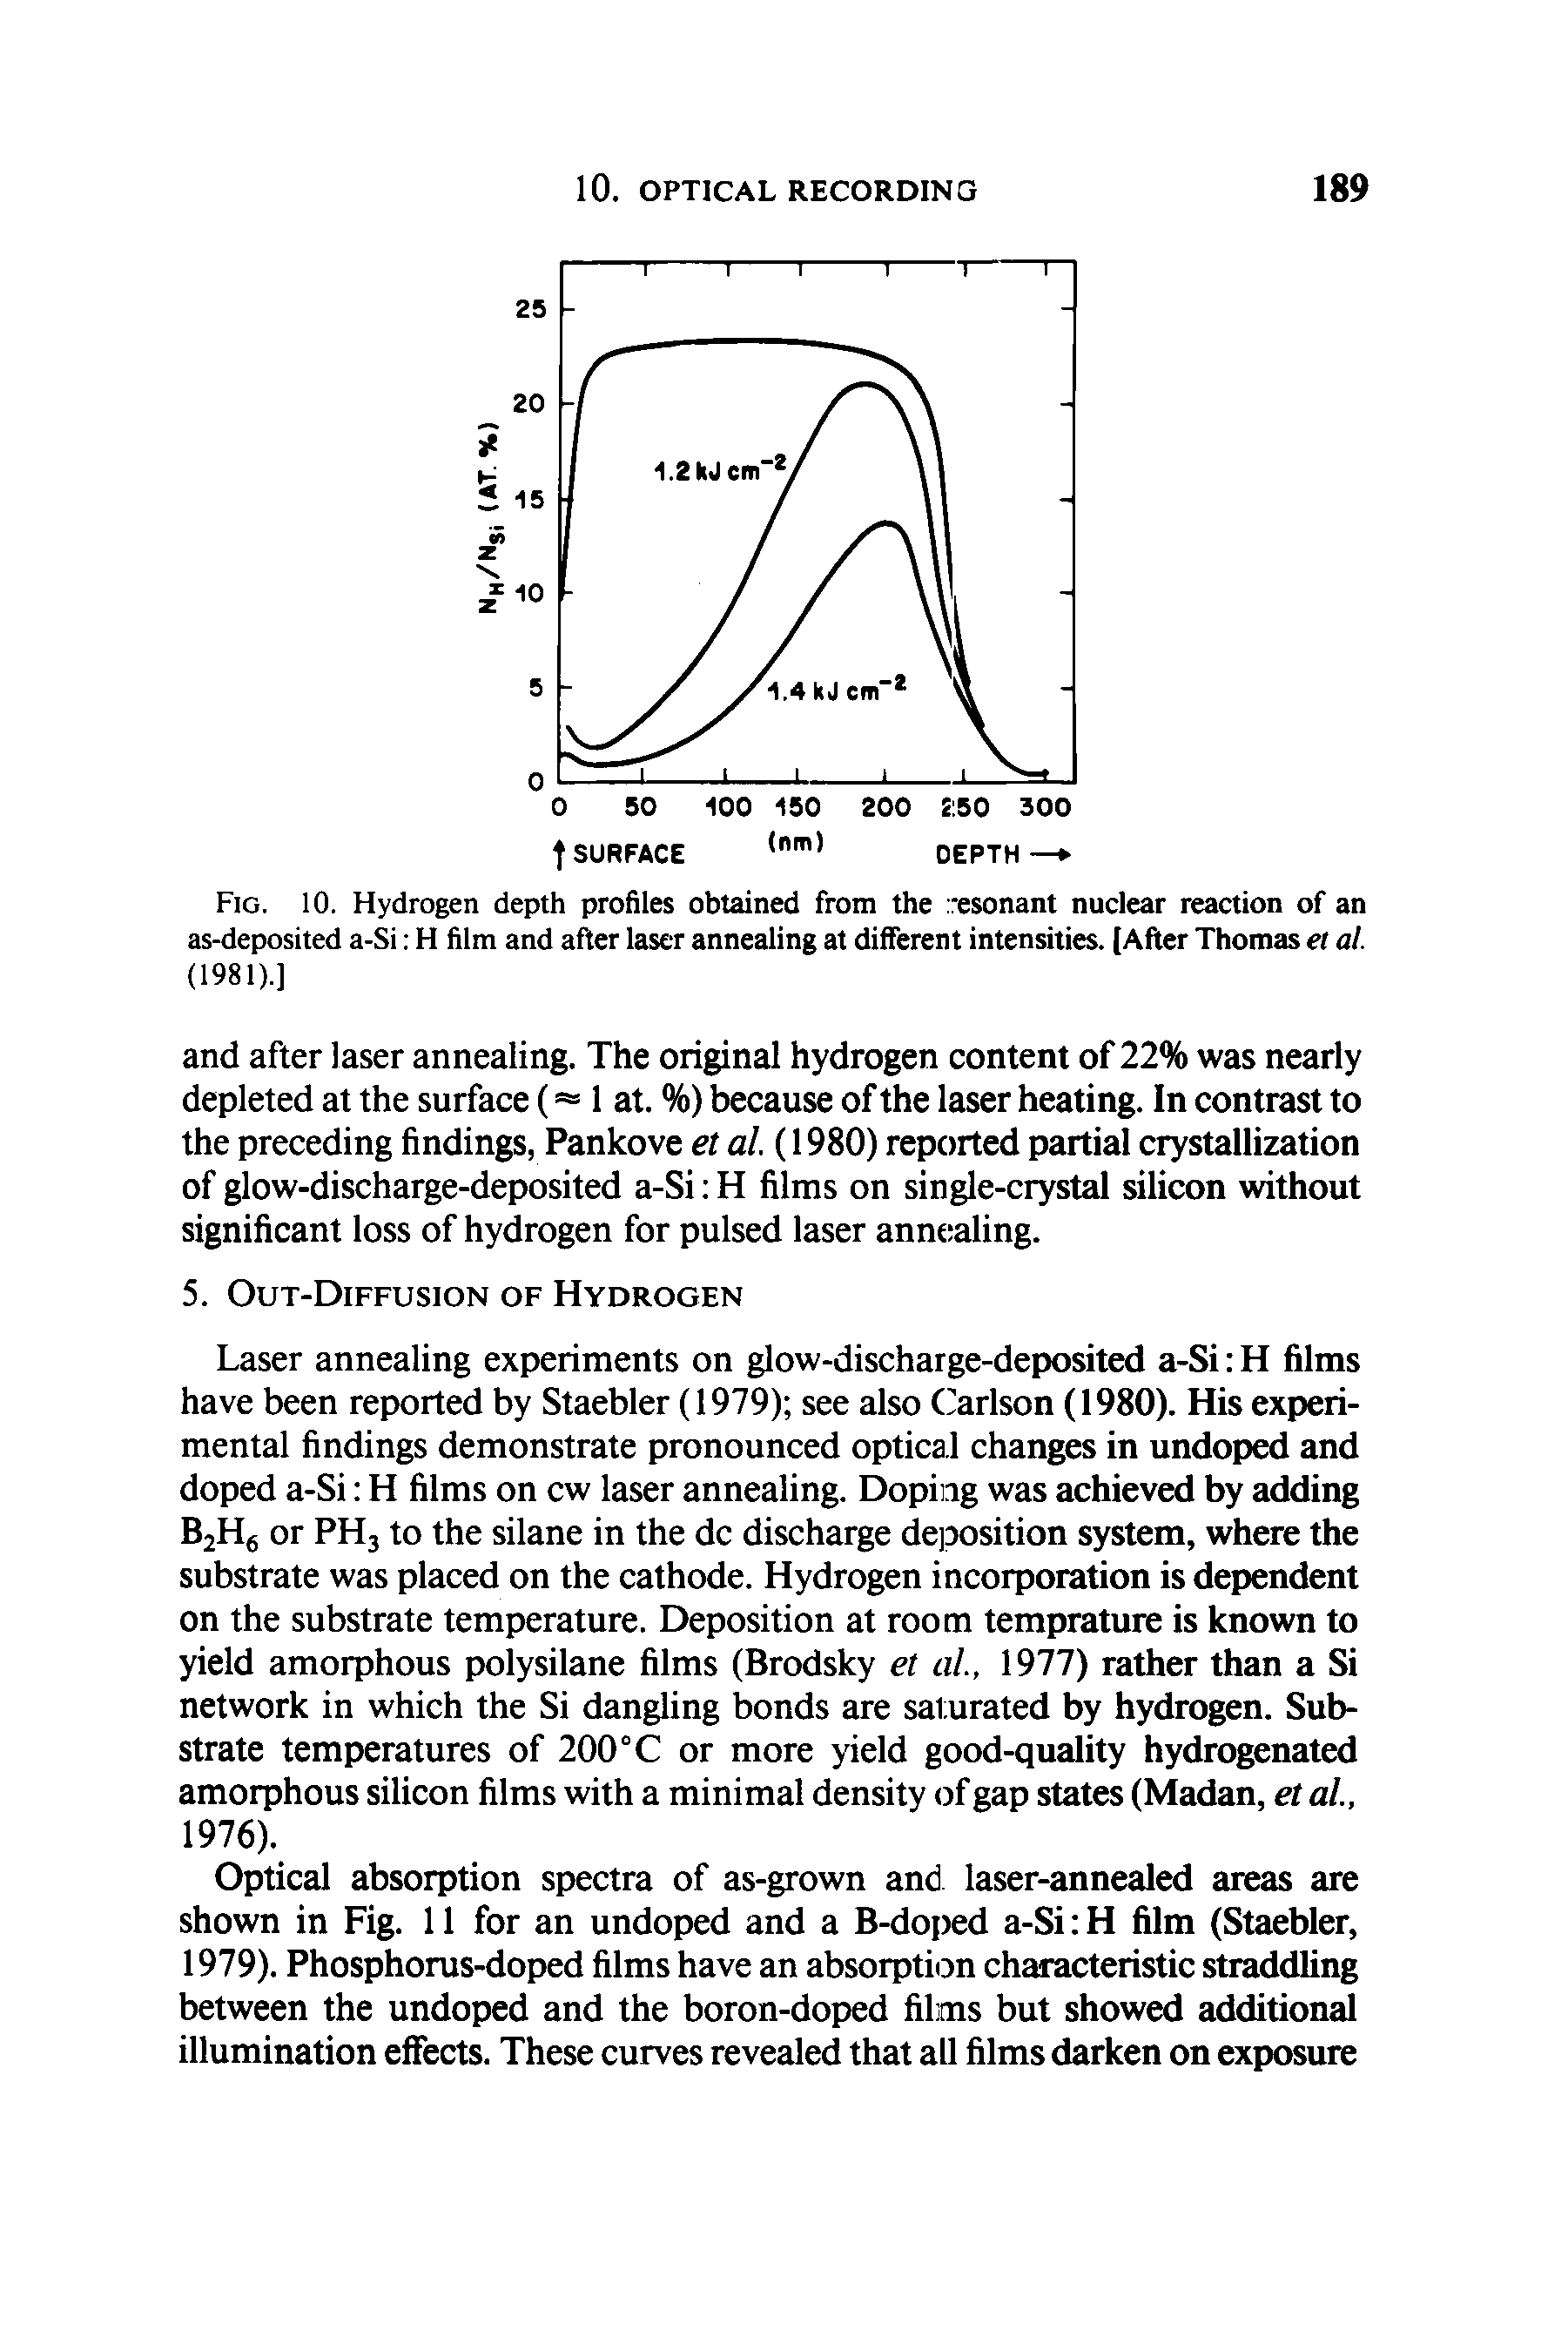 Fig. 10. Hydrogen depth profiles obtained from the resonant nuclear reaction of an as-deposited a-Si H film and after laser annealing at different intensities. [After Thomas et al.